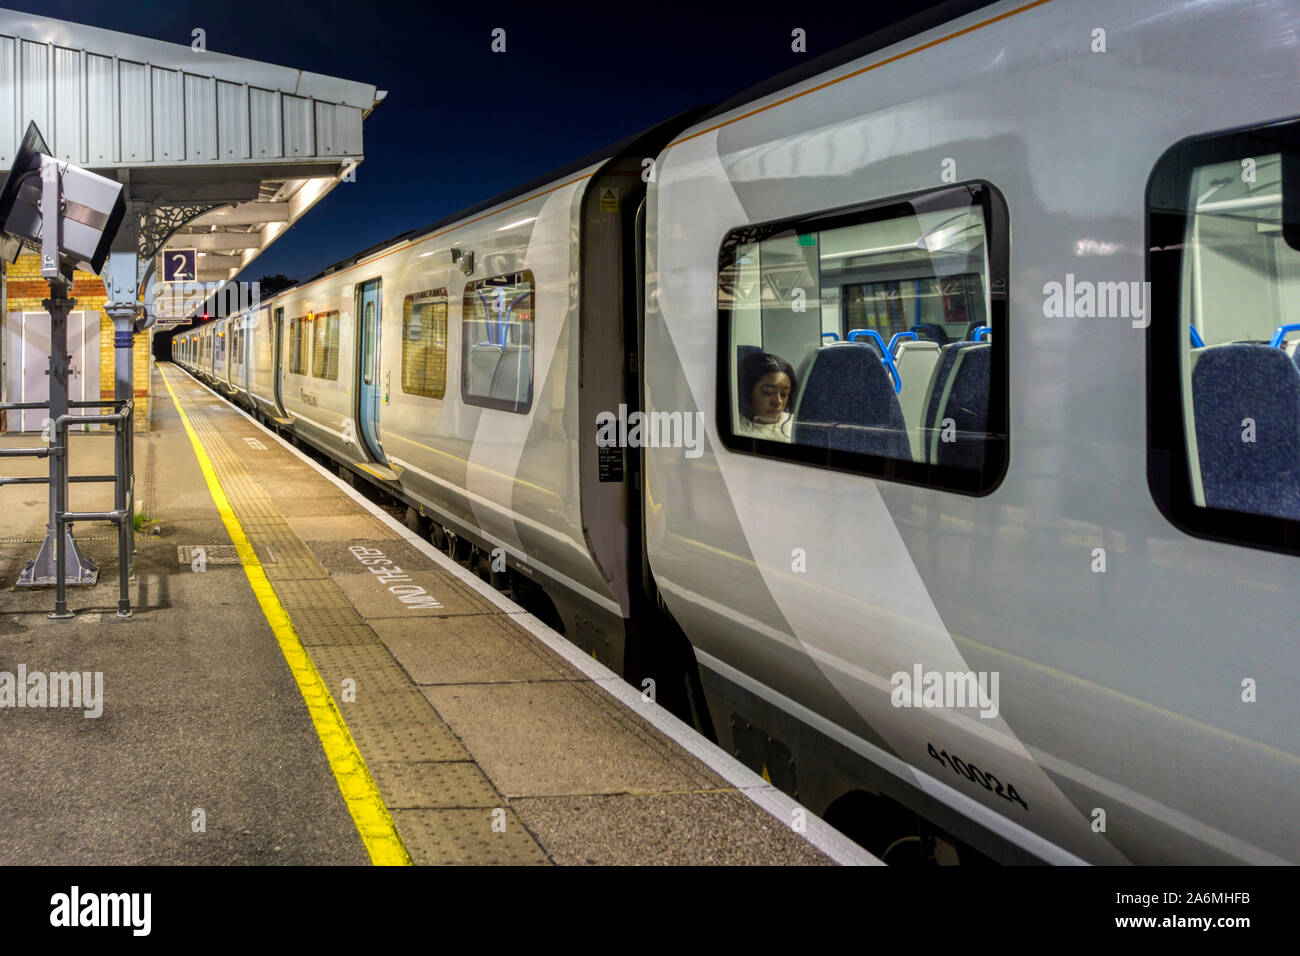 A ThamesLink train stopped at a deserted London suburban station platform at night. Stock Photo